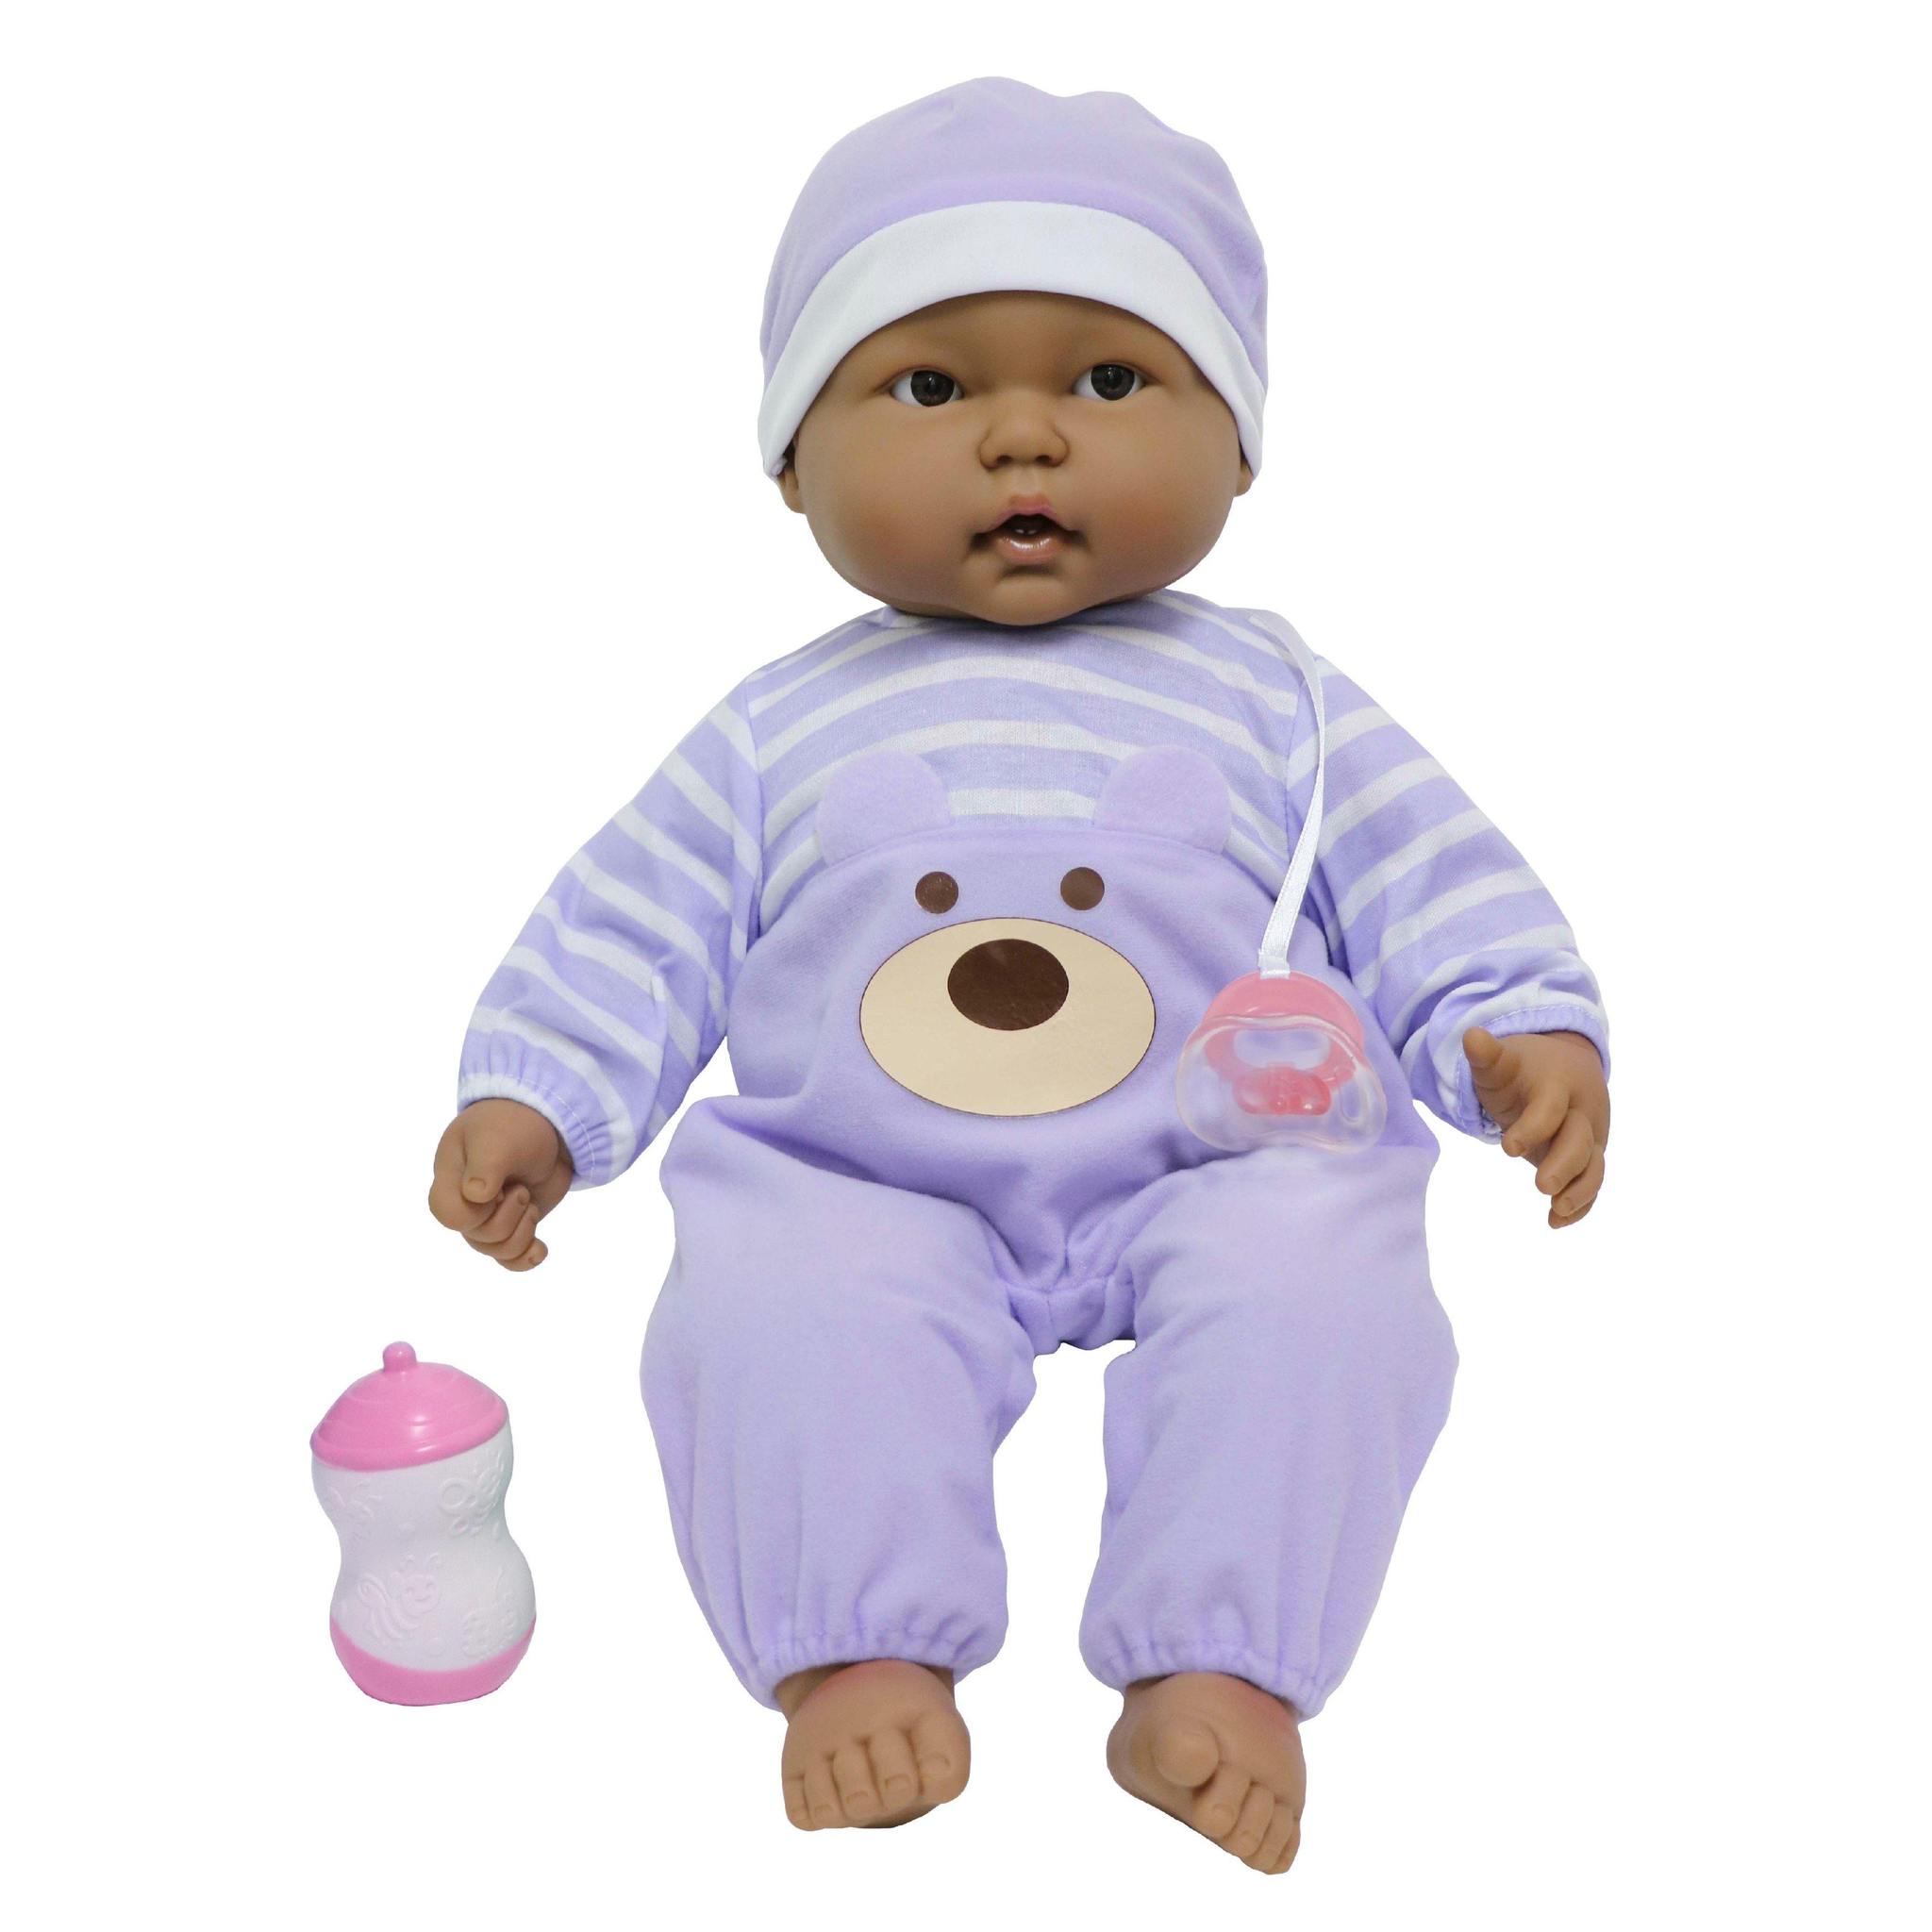 Lots to Cuddle Babies Hispanic Soft Body Baby Doll  Purple Outfit - 20 in -  Dolls By Berenguer, 35019